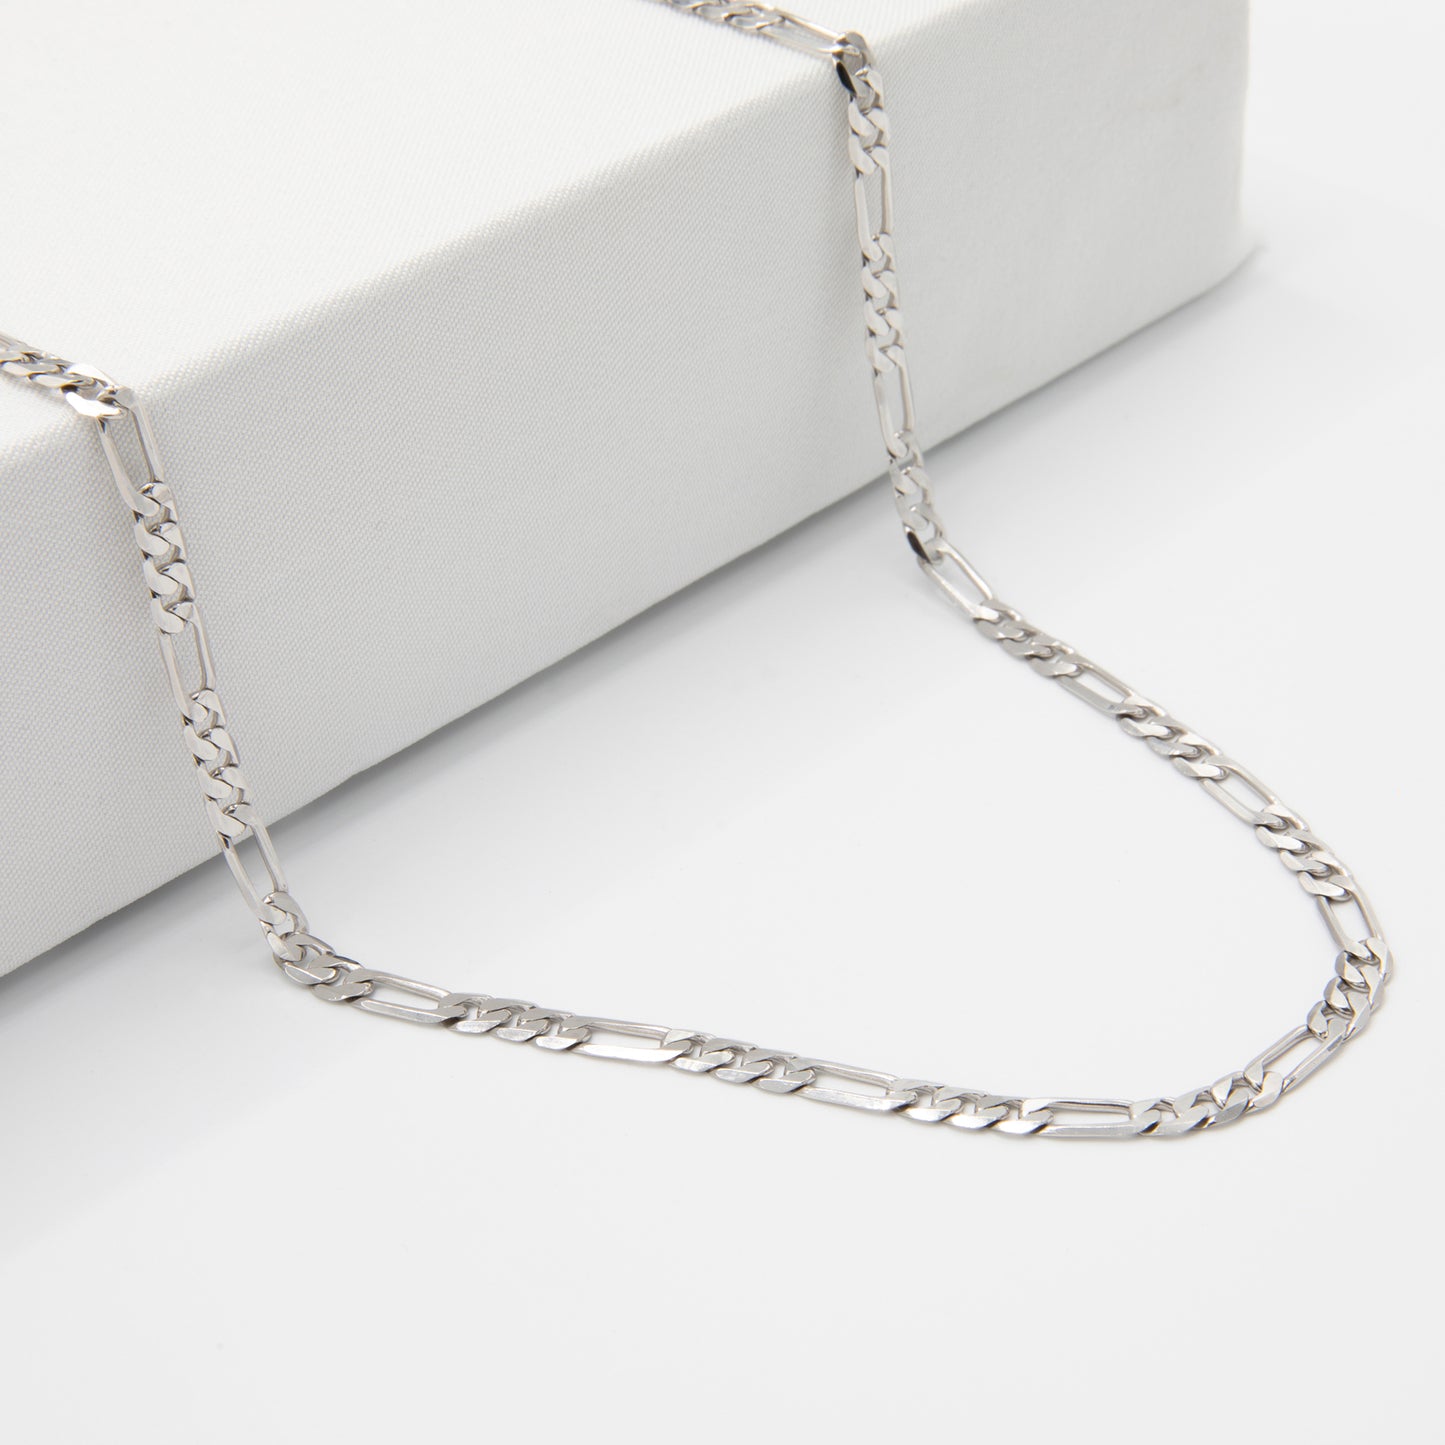 Rhodium-Plated 925 Sterling Silver Figaro Chain